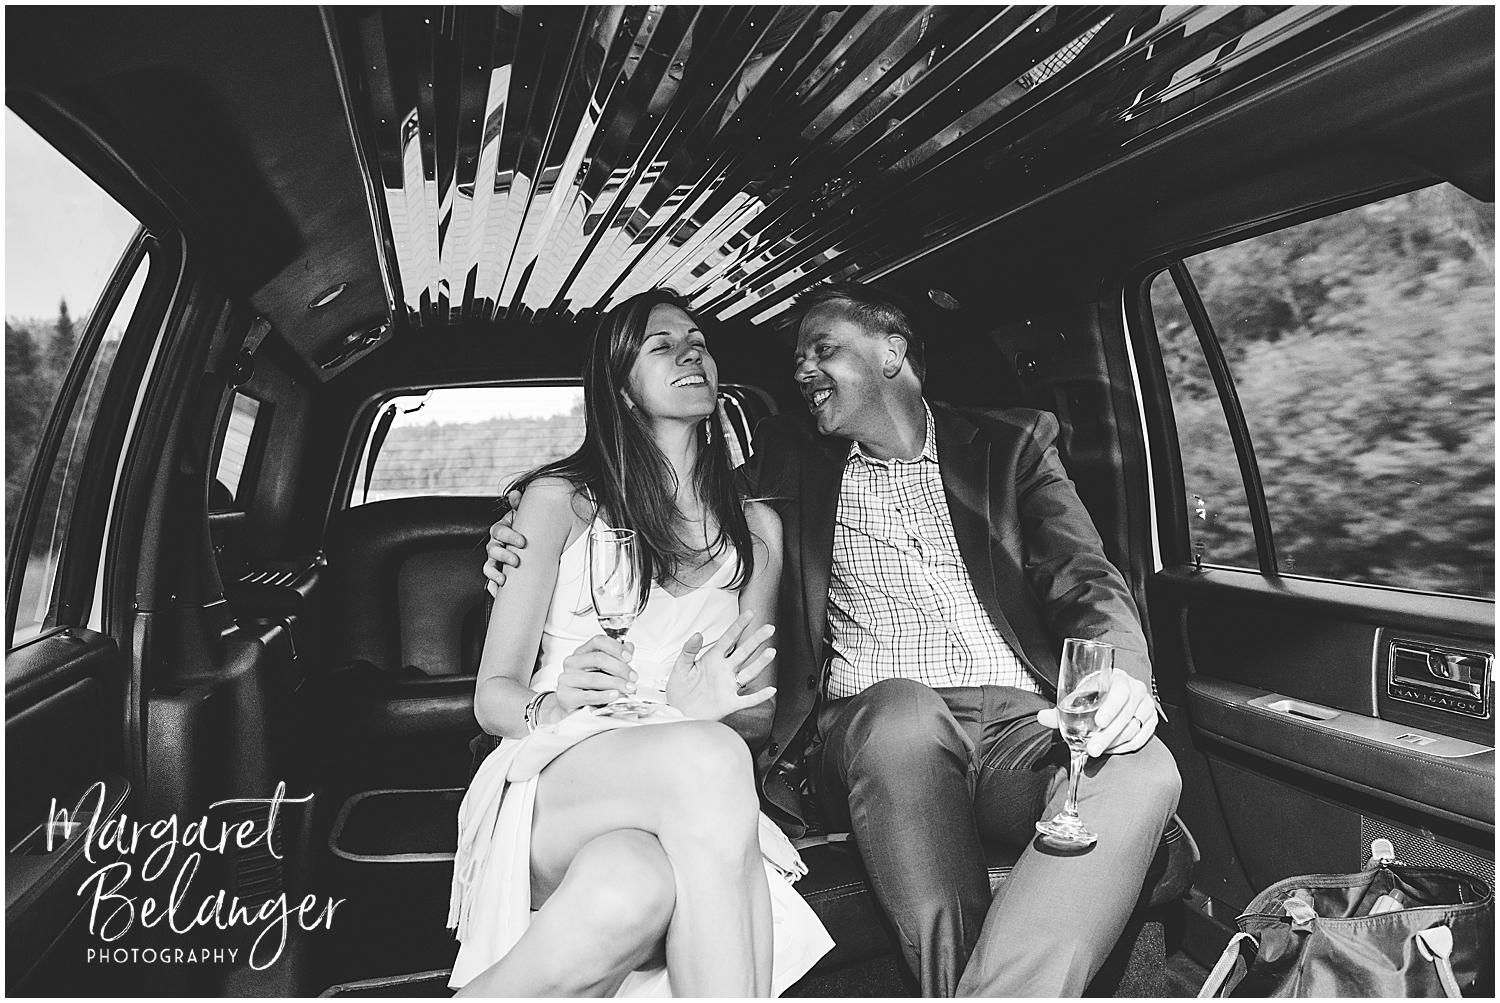 A bride and groom singing together in the back seat of a limousine with a glass of champagne.